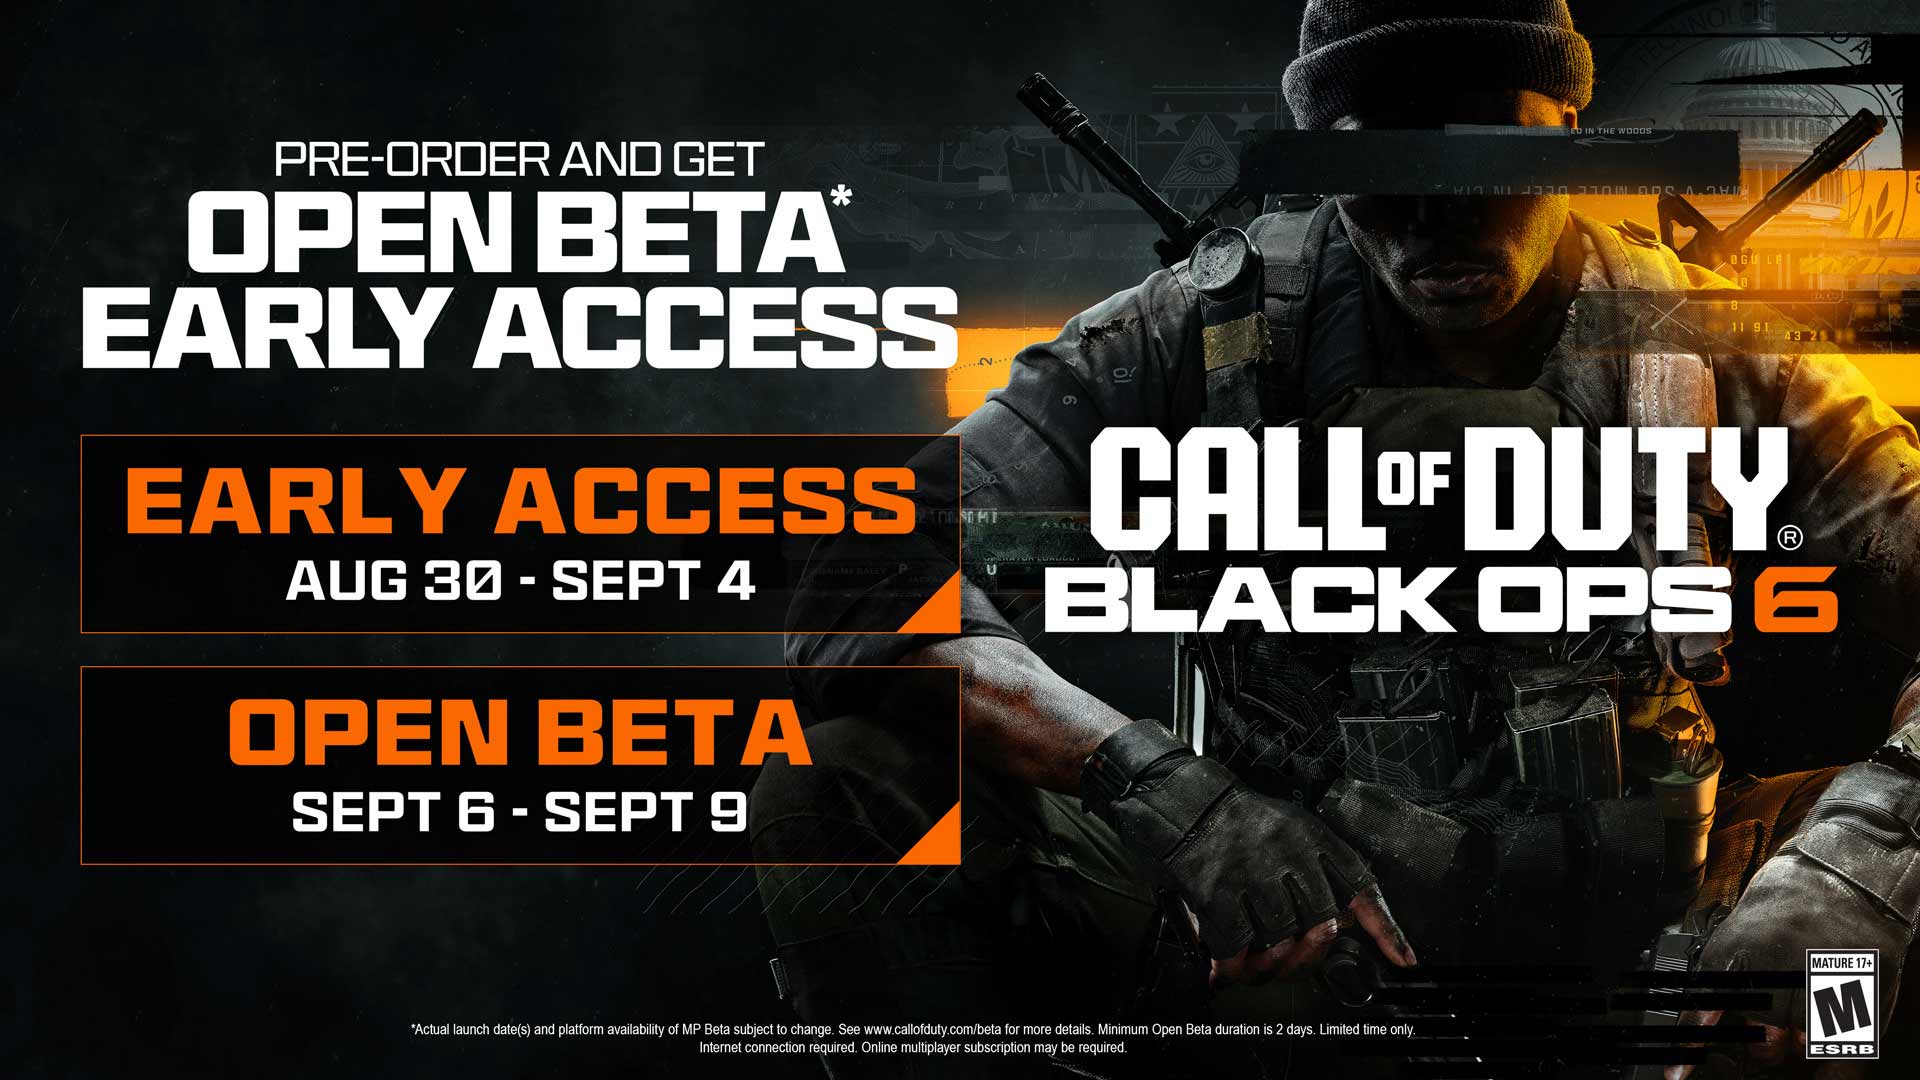 Preorder and you'll get early access to Black Ops 6's beta on August 30